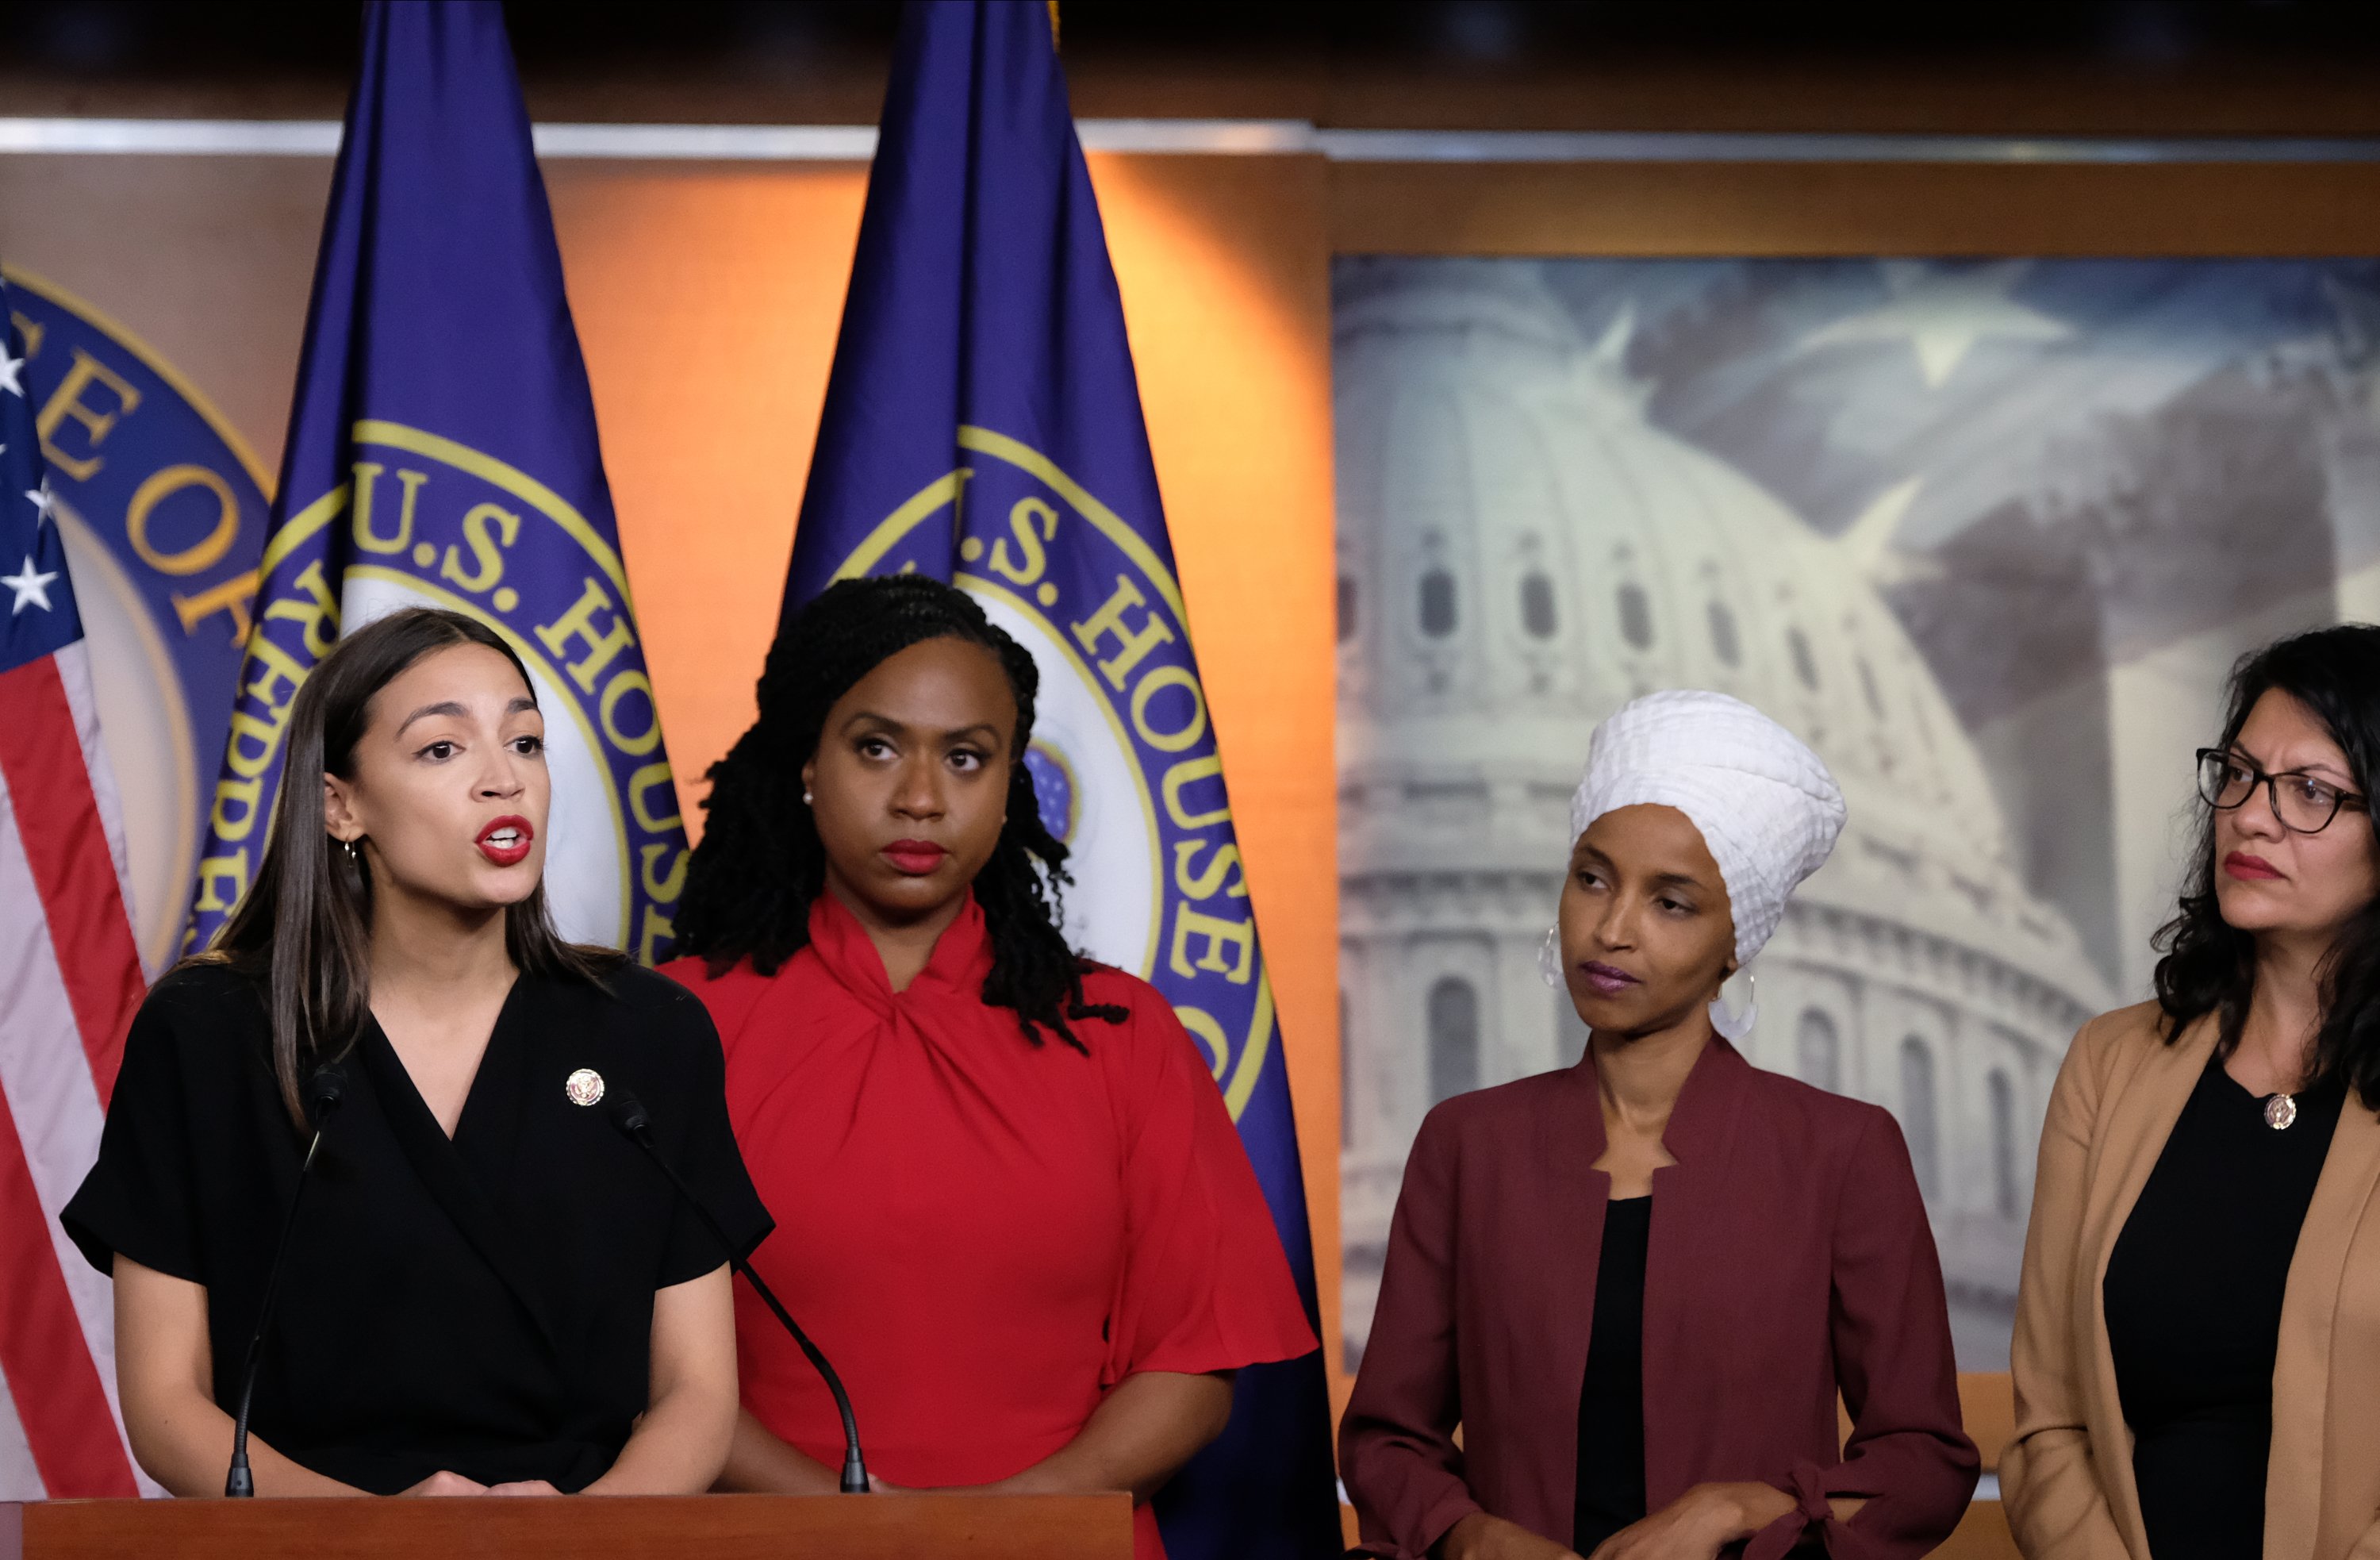 U.S. Rep. Alexandria Ocasio-Cortez speaks as Reps. Ayanna Pressley, Ilhan Omar and Rashida Tlaib listen during a news conference at the U.S. Capitol on July 15, 2019 in Washington, DC. (Photo by Alex Wroblewski/Getty Images)